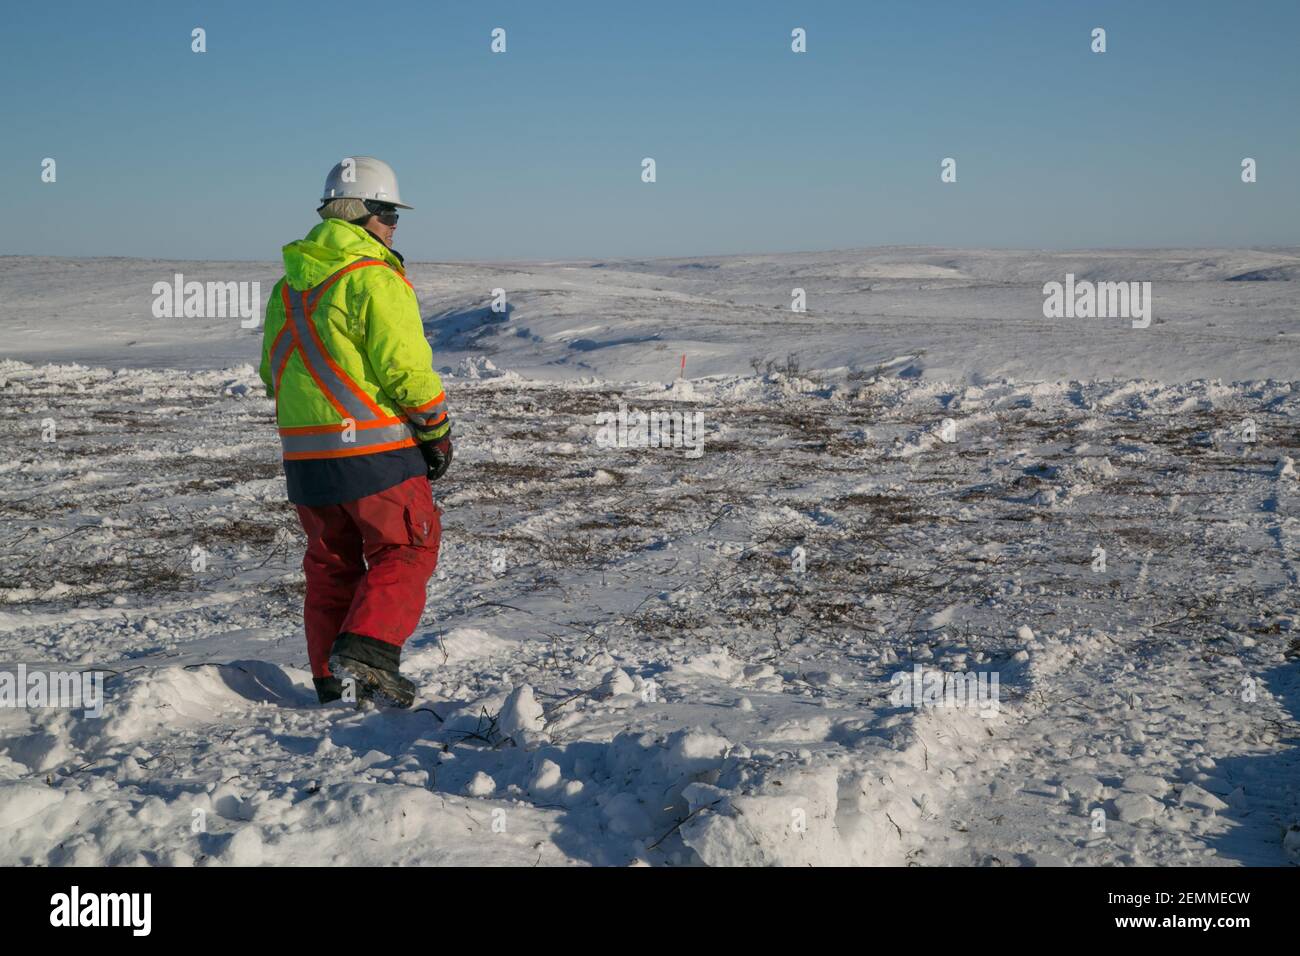 Indigenous woman Safety Officer in uniform at work on the Inuvik-Tuktoyaktuk Highway in winter, Northwest Territories, Canada's Arctic. Stock Photo